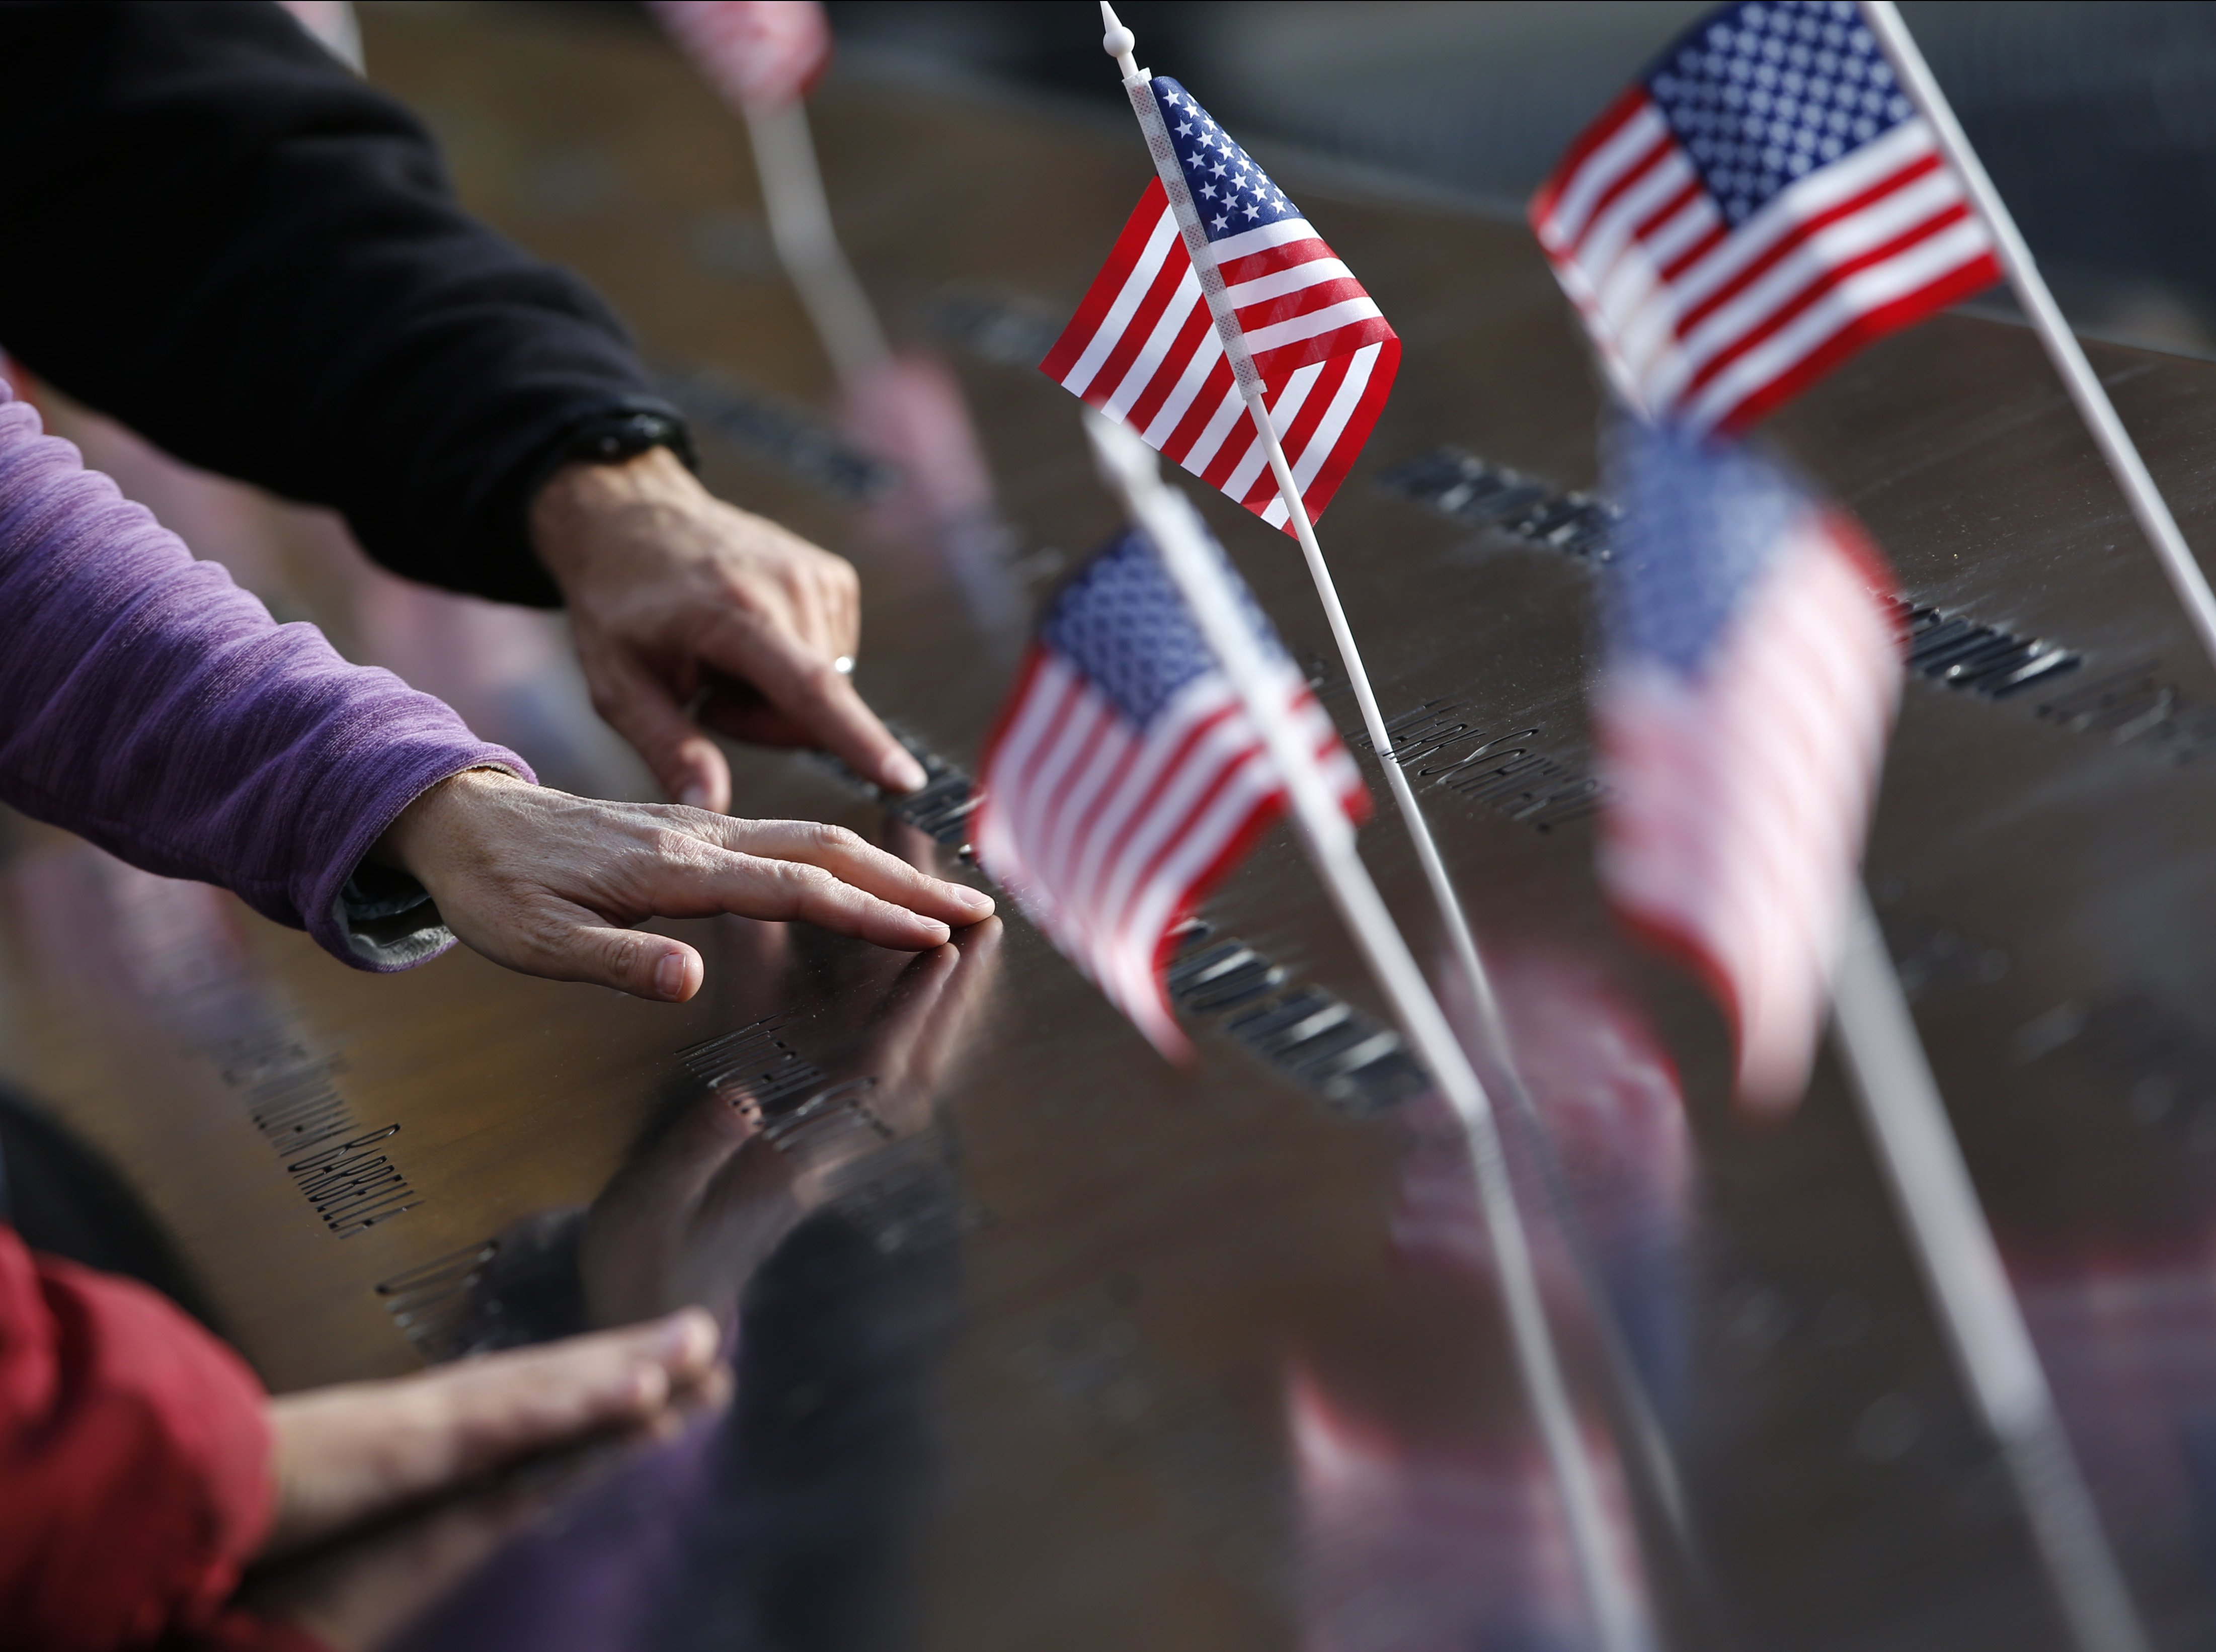 Hands reach out to touch the names inscribed at the South Pool of the 9/11 Memorial in New York City on Nov. 9, 2015. (Kathy Willens—AP)